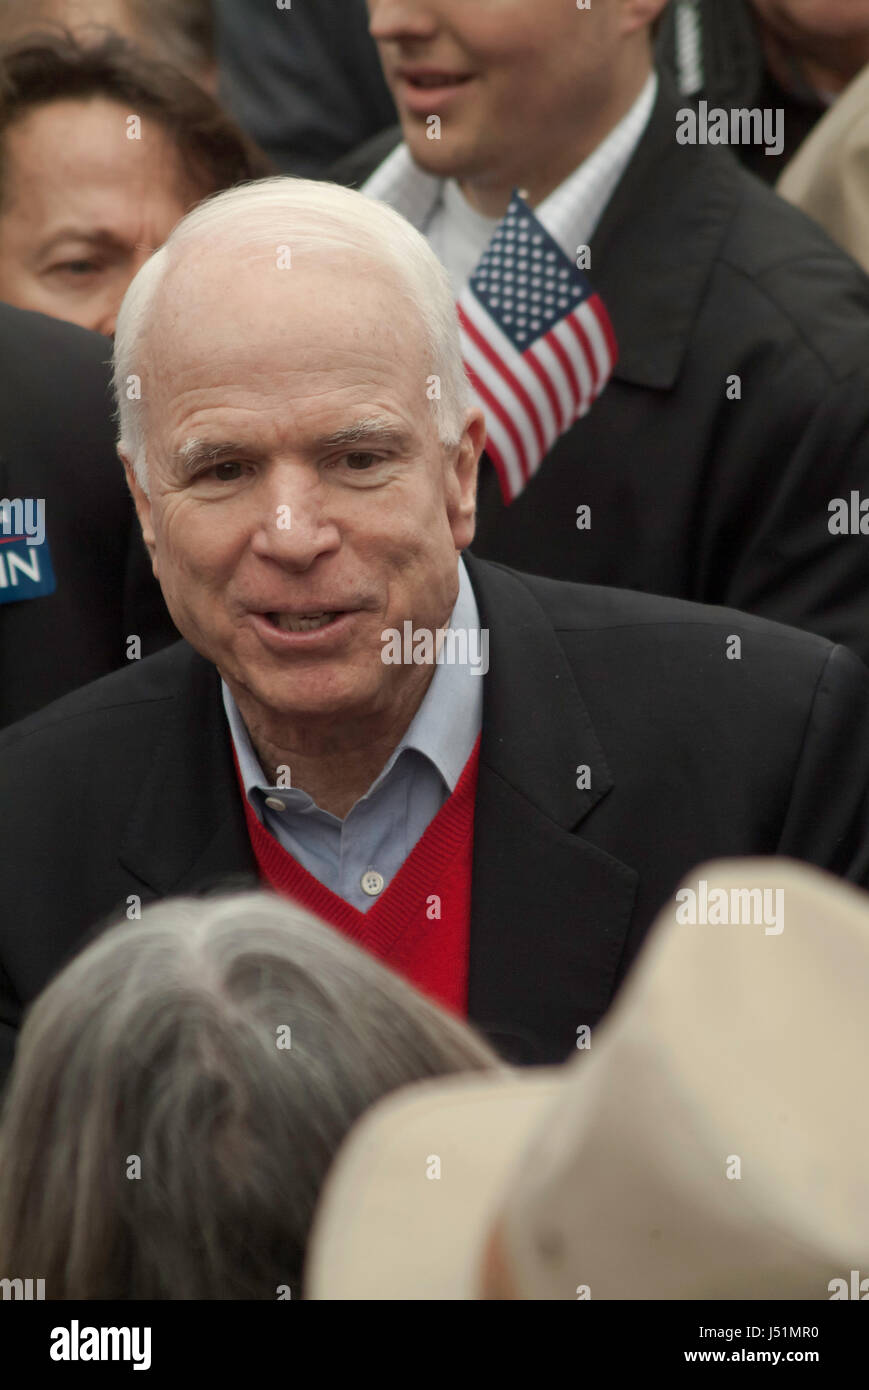 KEENE, NH/US - JANUARY 7, 2008: US Senator John McCain speaks with supporters at an outdoor rally on the final day before the 2008 NH primary. Stock Photo